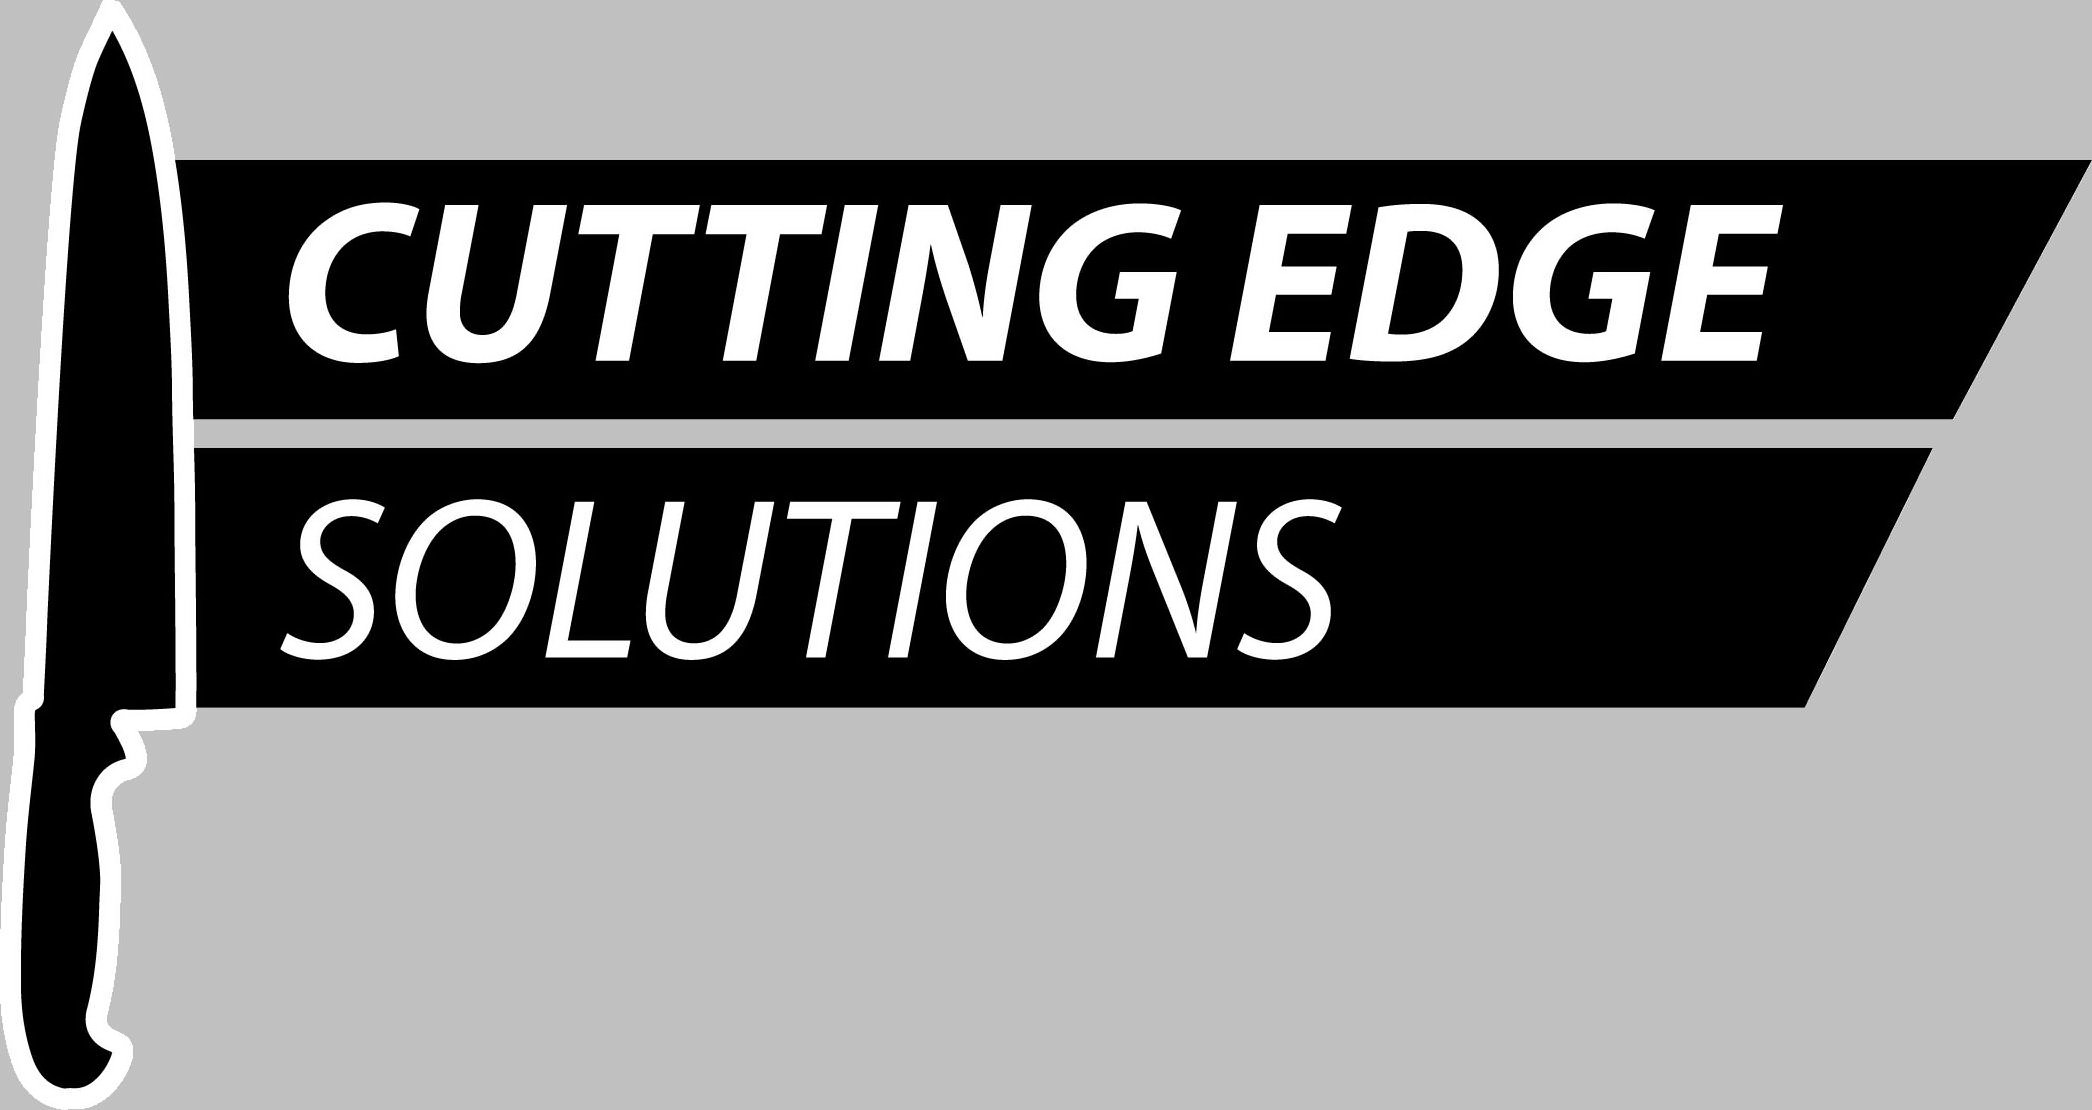  CUTTING EDGE SOLUTIONS